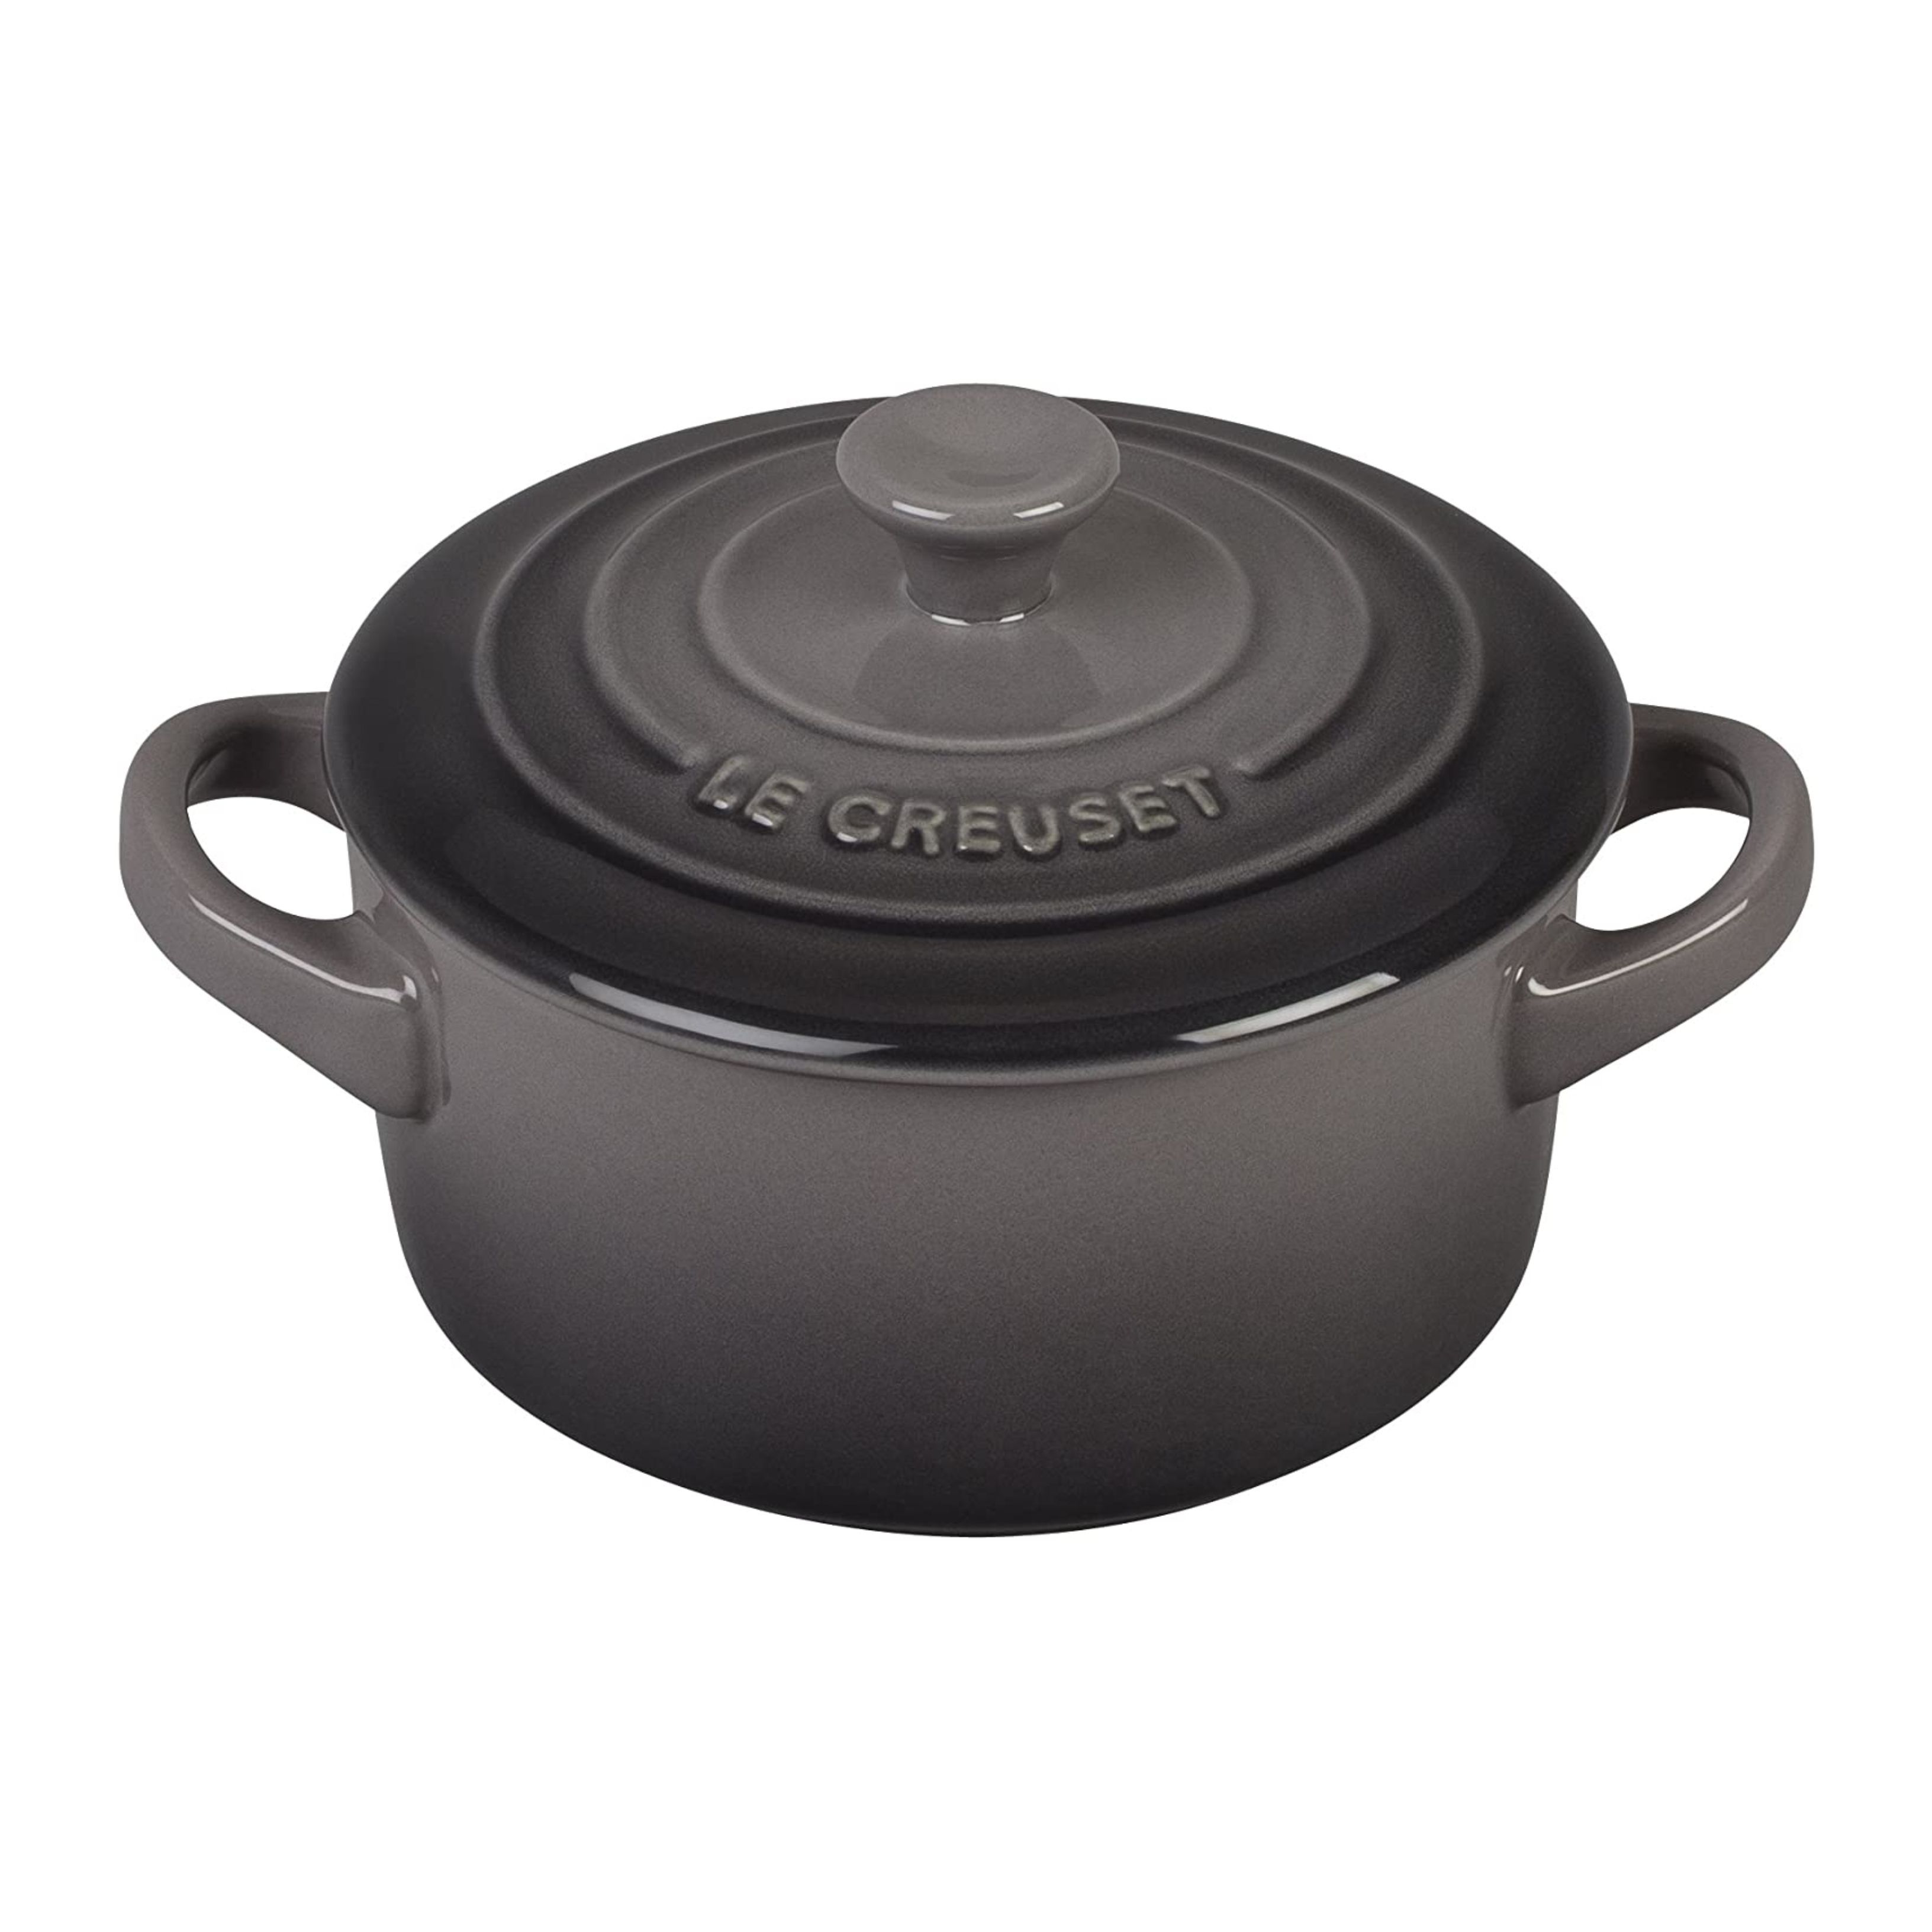 You Can Get This Mini Le Creuset Cookware For Under $20 On Amazon Right ...